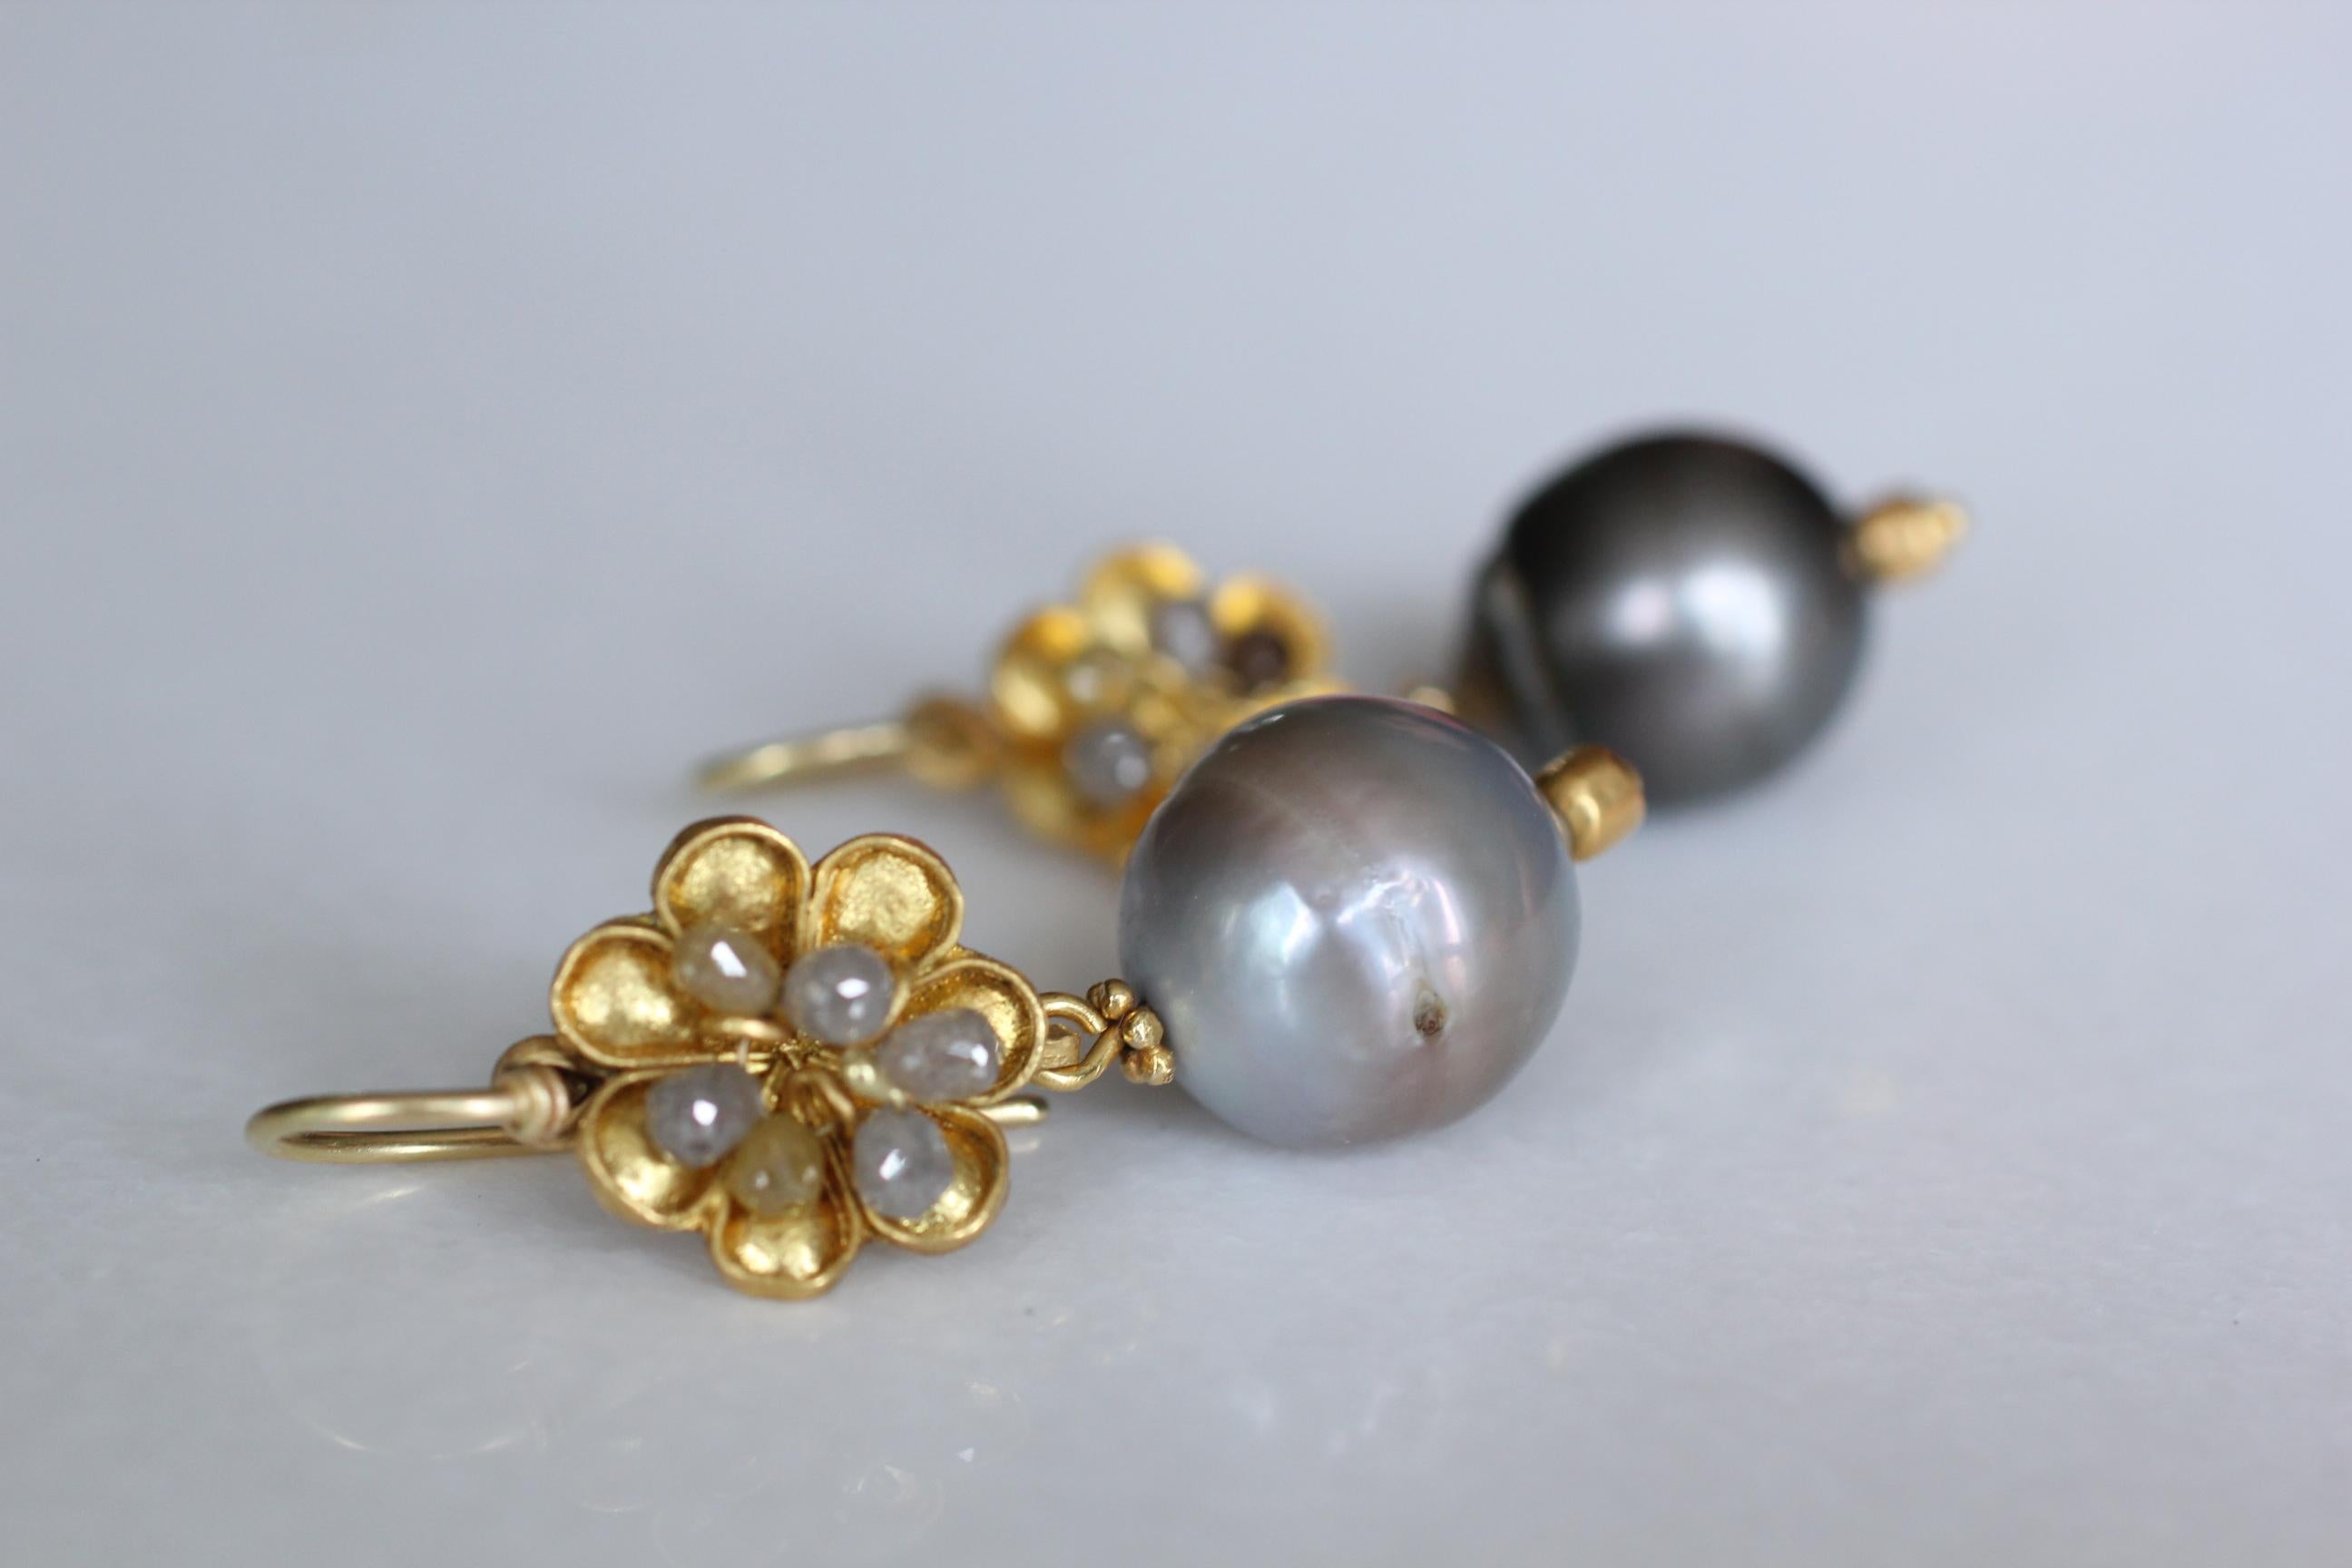 22 Karat Gold Gray Tahitian Pearls Diamond Contemporary Drop Dangle Earrings In New Condition For Sale In New York, NY